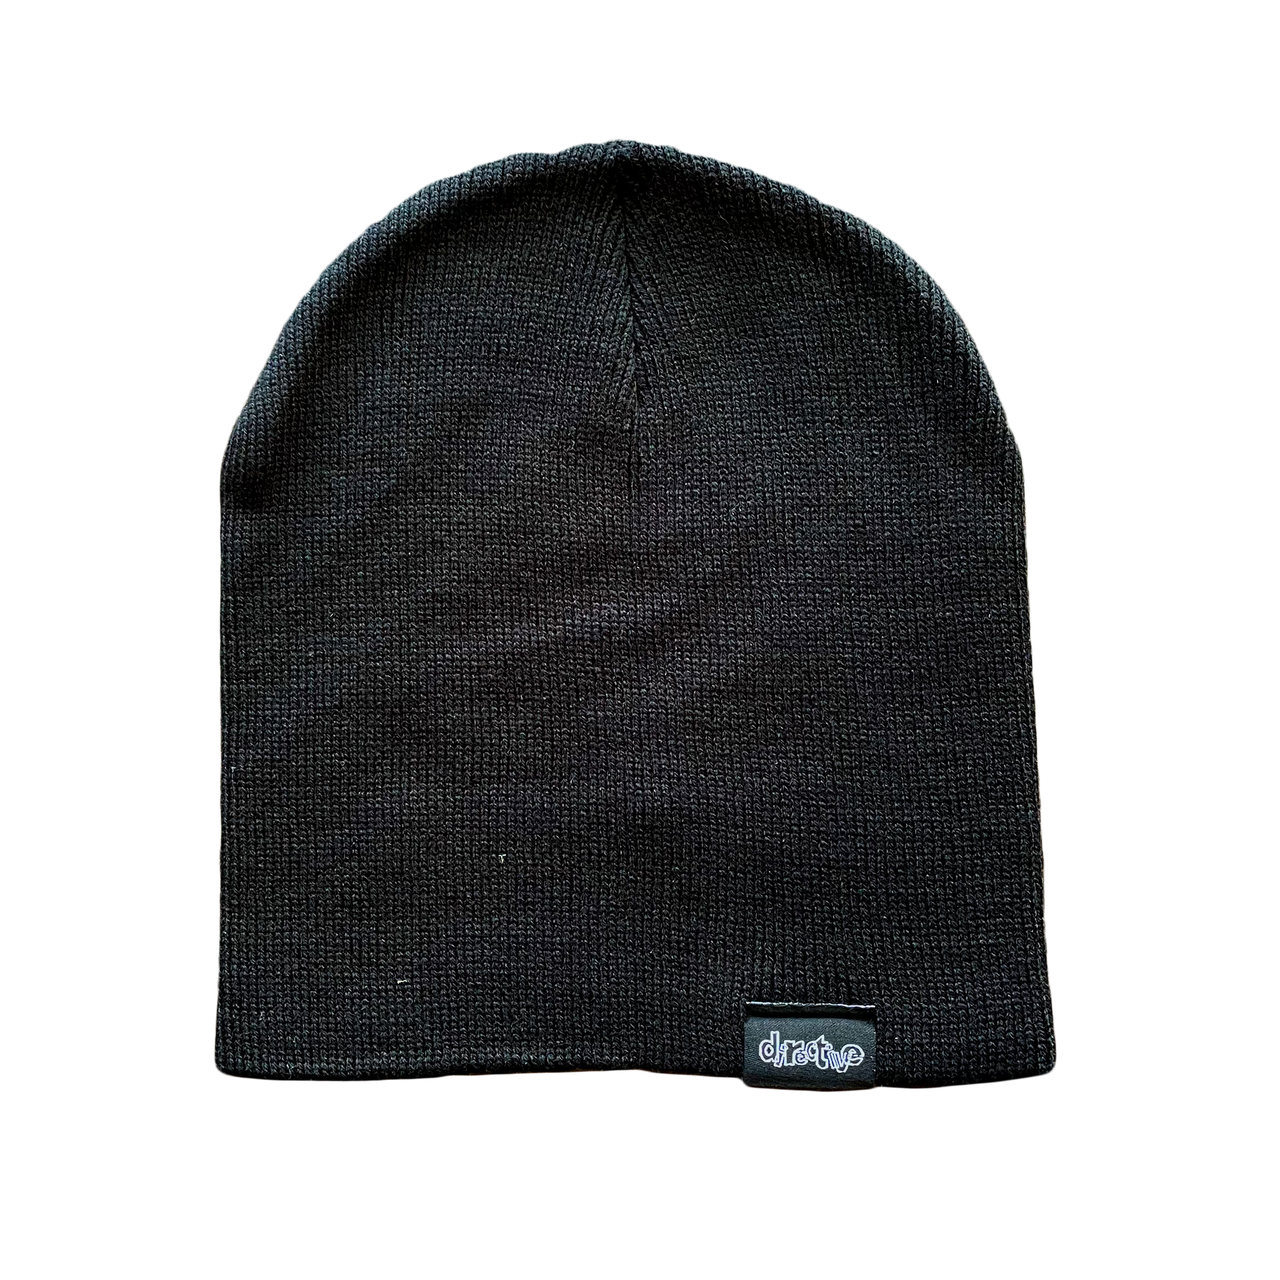 Directive Classic Skully Beanie - Assorted Colors